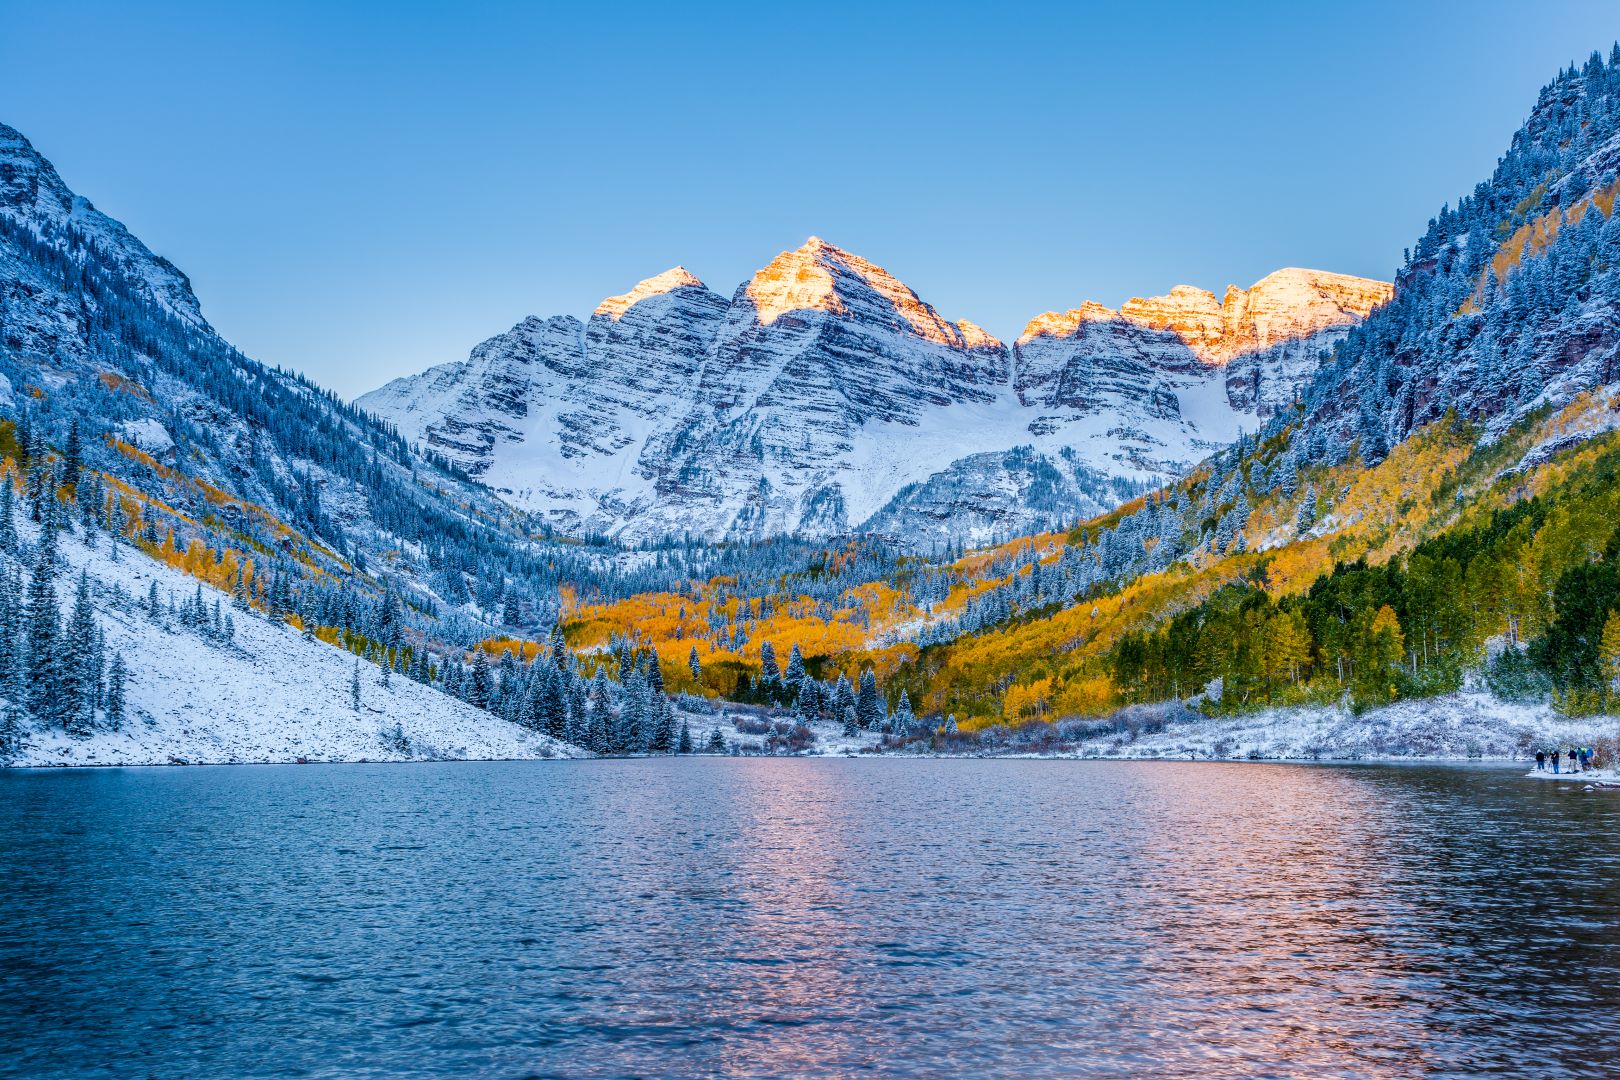 Snowy mountains and a lake at sunrise in Aspen, CO